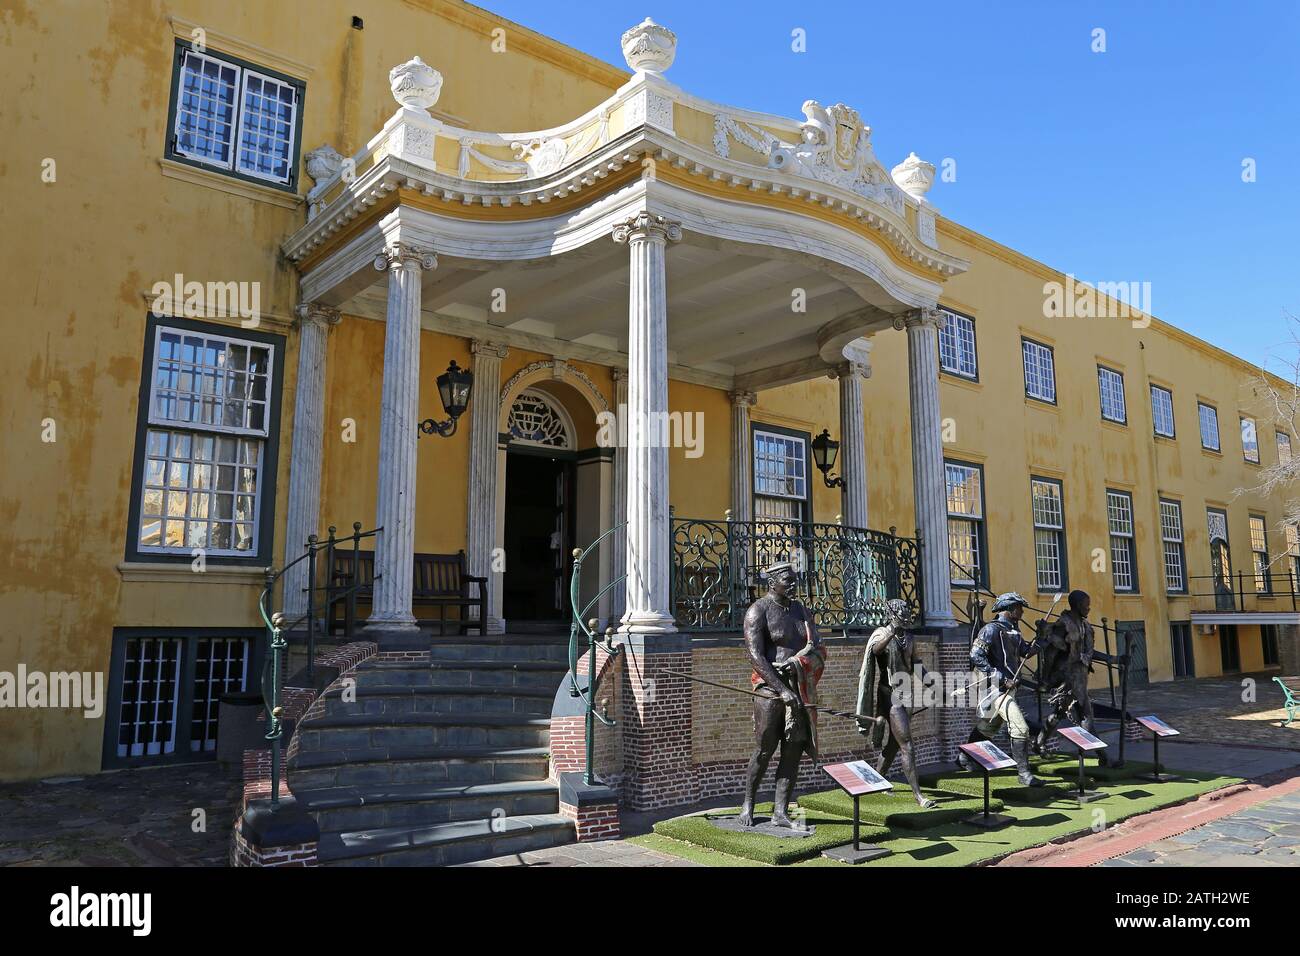 Tribal leader statues, Governor's House, Castle of Good Hope, Cape Town, Table Bay, Western Cape Province, South Africa, Africa Stock Photo